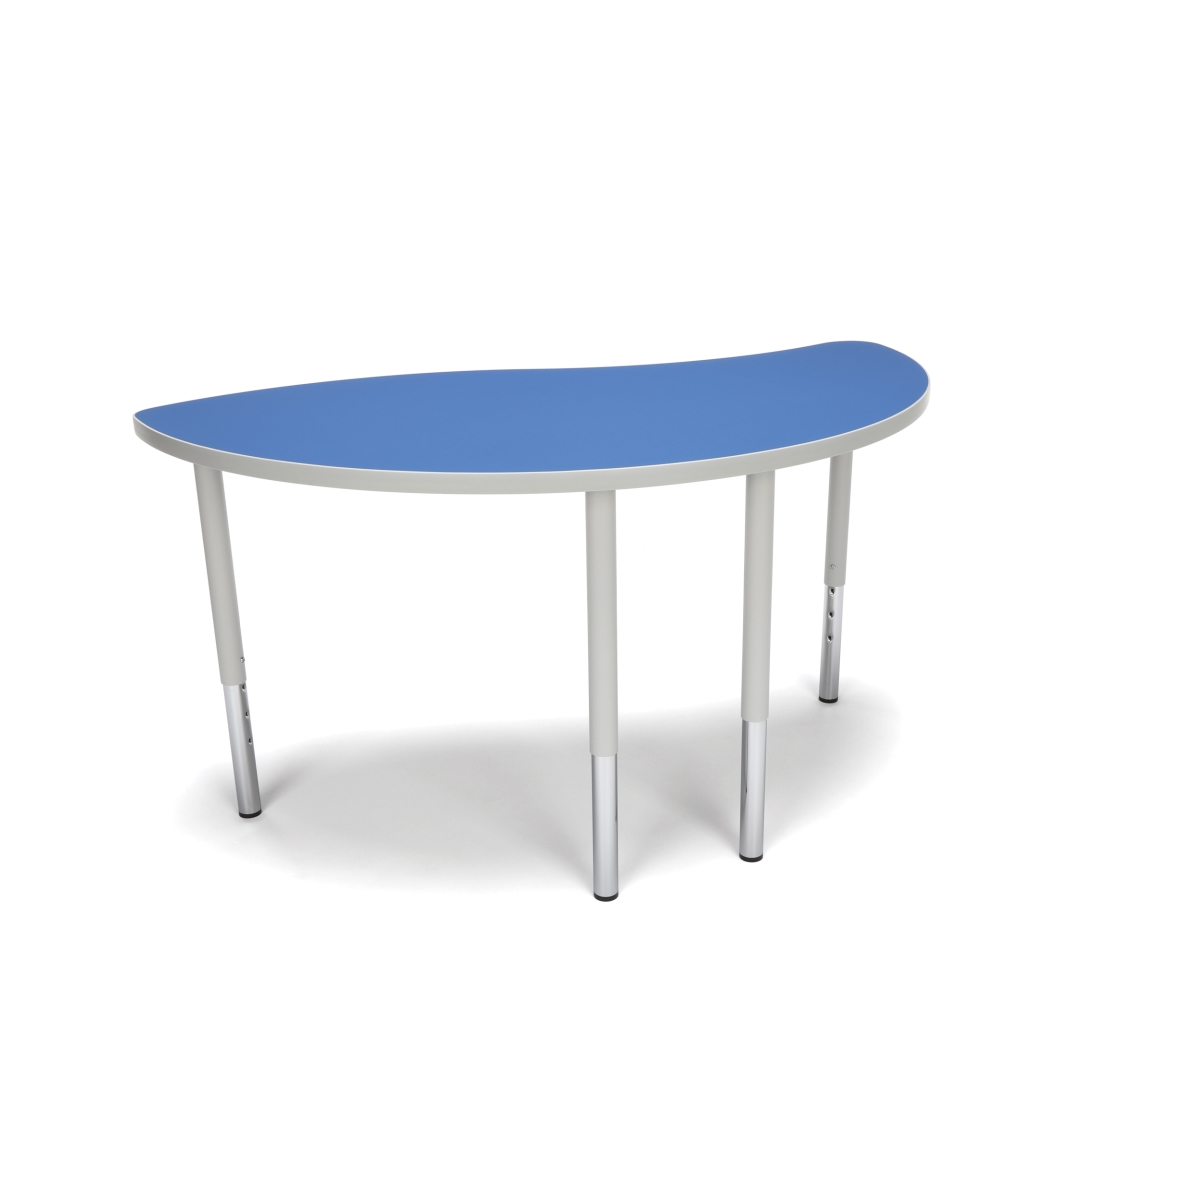 Ying-ll-blu Adapt Series Ying Standard Table - 23-31 In. Height Adjustable Desk, Blue